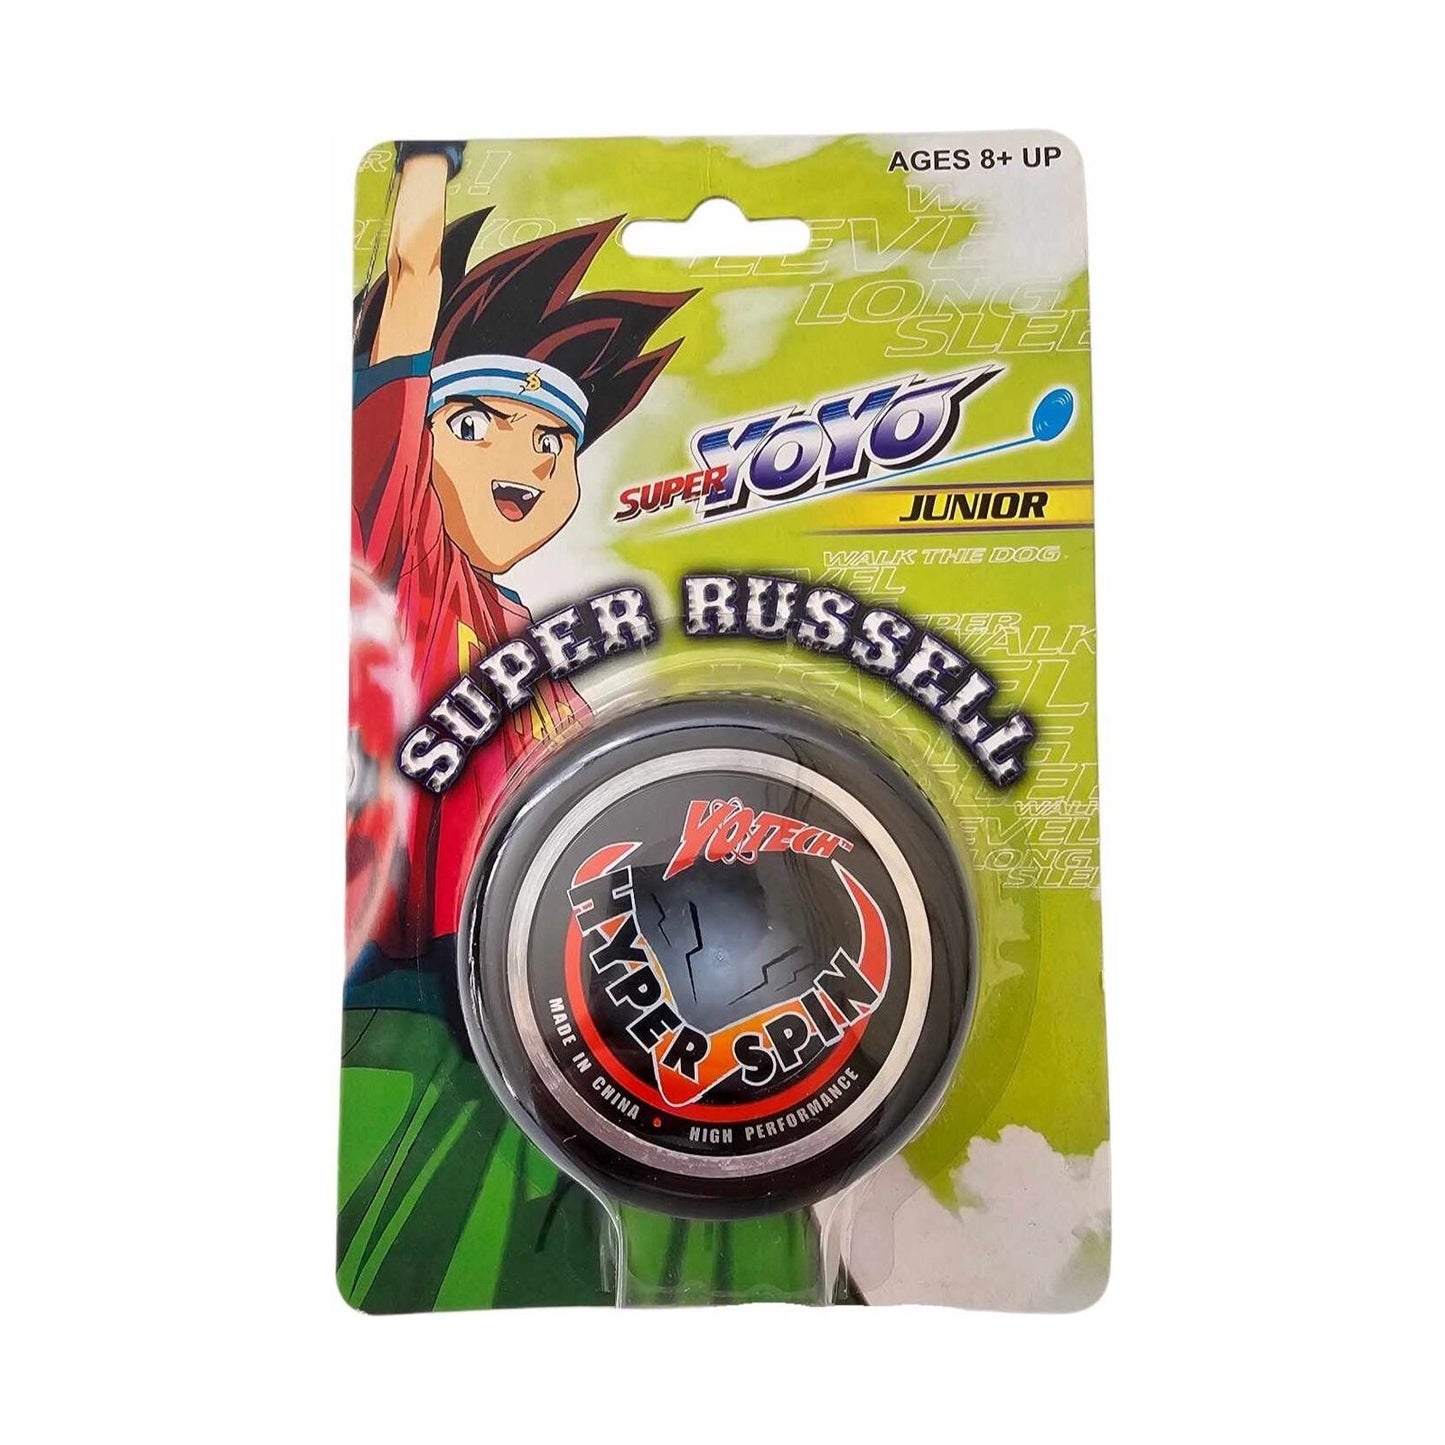 Super Russell Yoyo Toy For Kids - Black